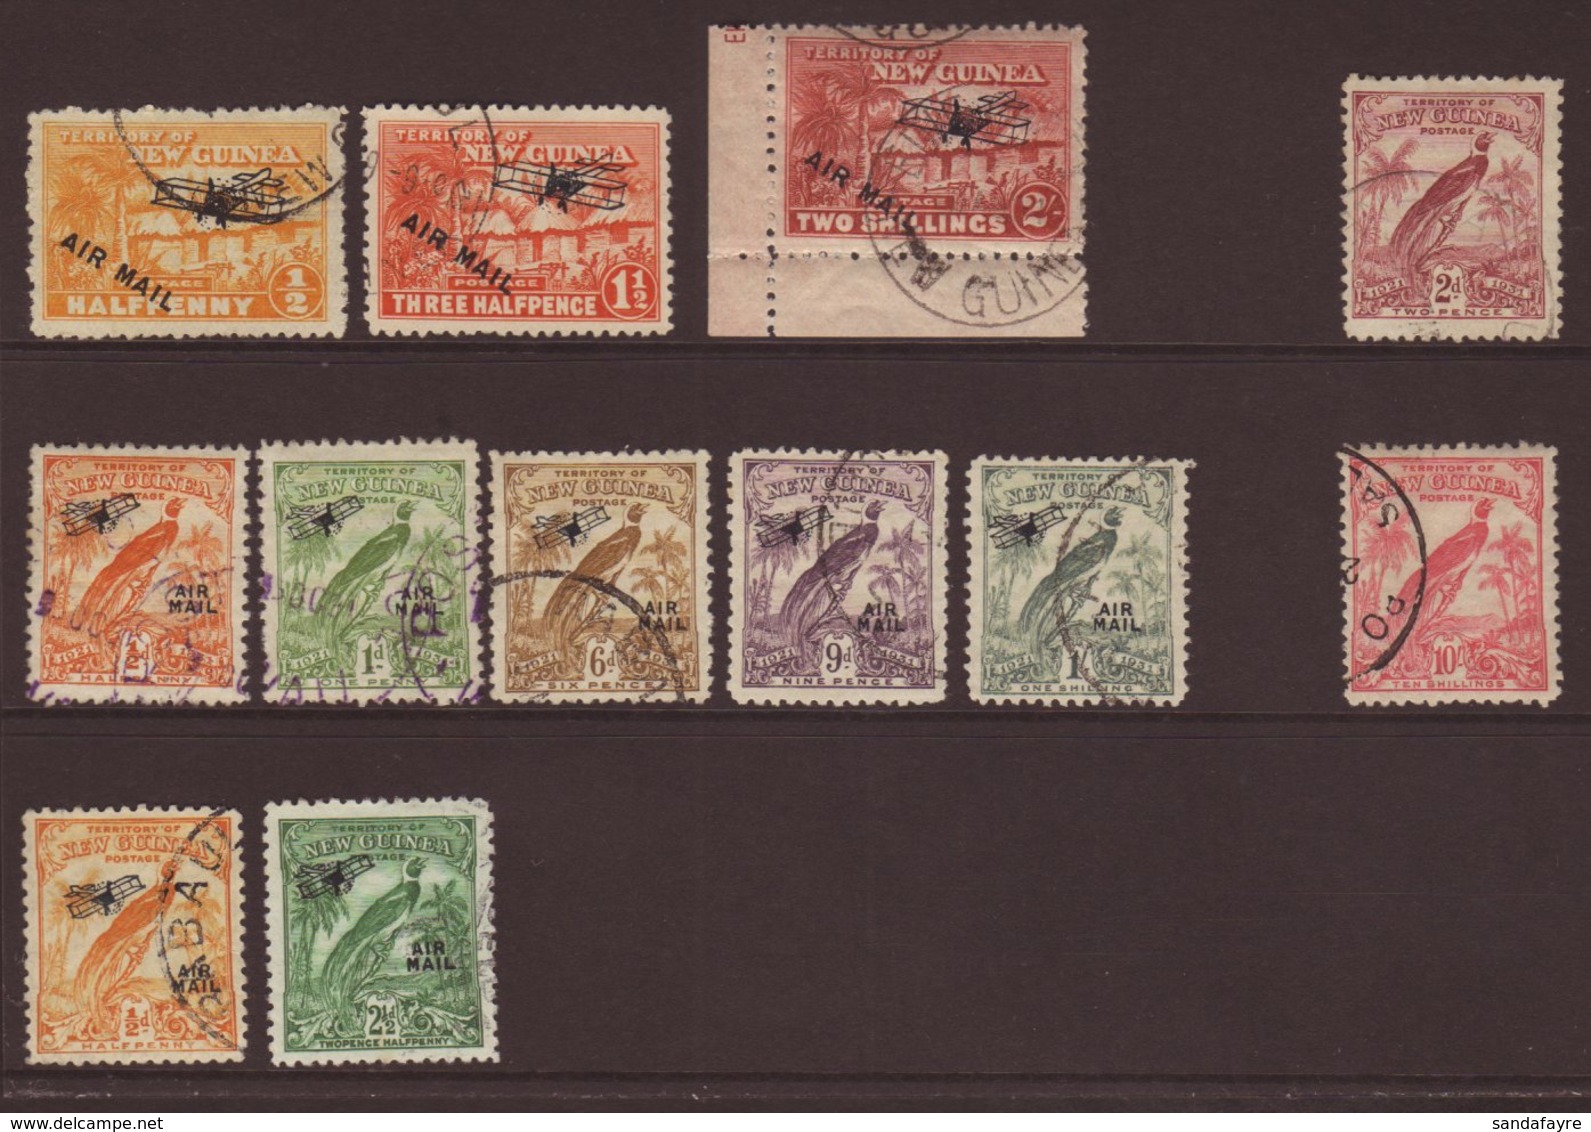 1925-34 A Useful Fine Used Range Incl. 1931 Village Air 2s, 1932-34 10s Etc. (12 Stamps) For More Images, Please Visit H - Papoea-Nieuw-Guinea